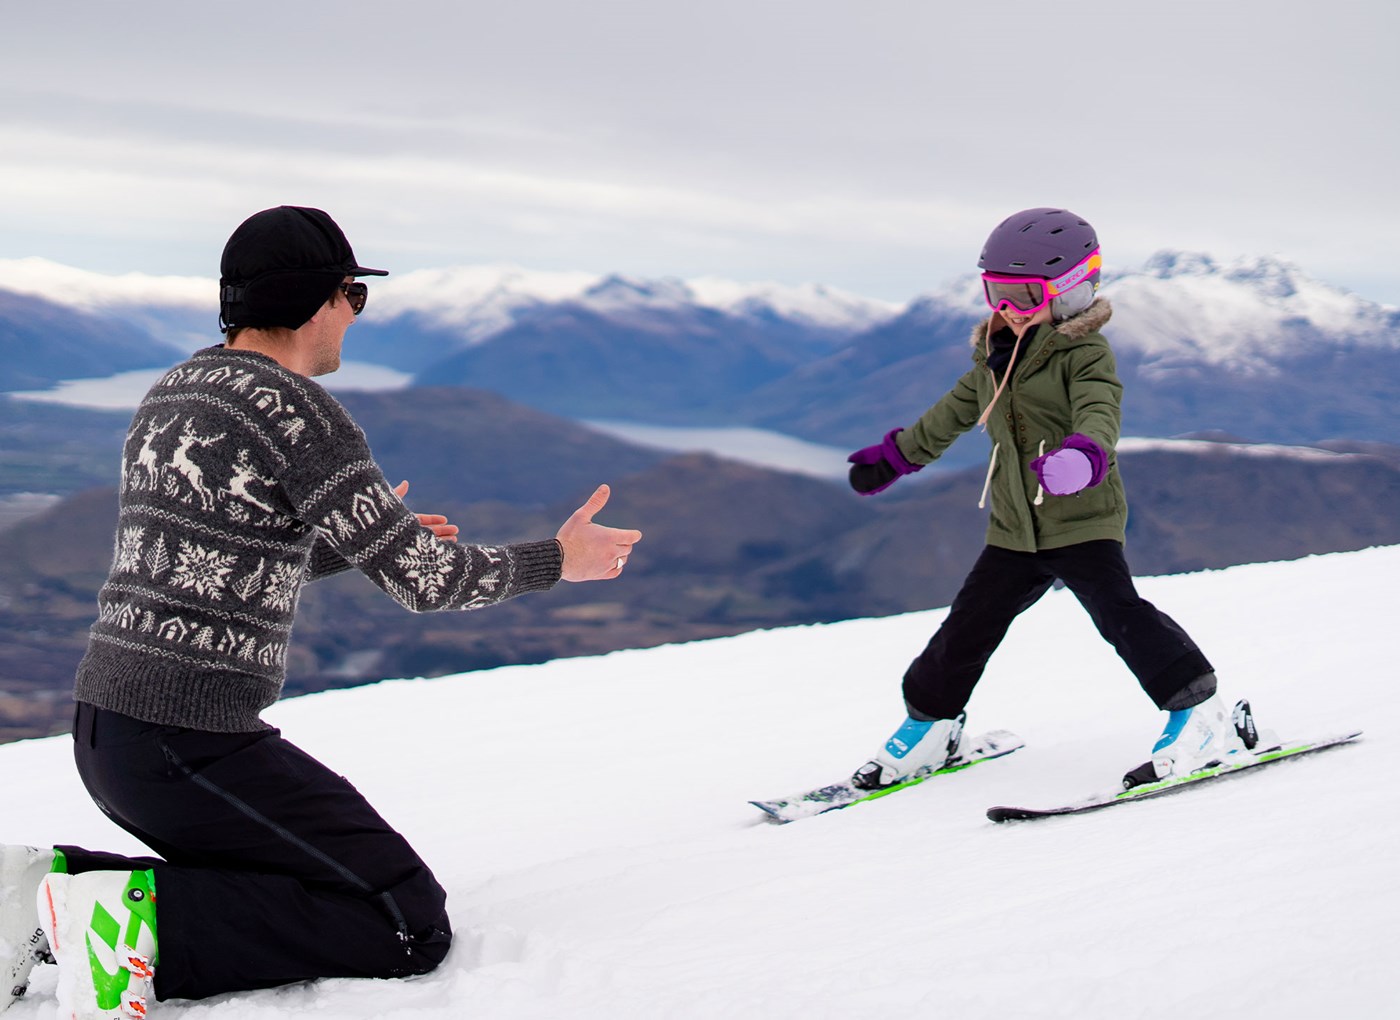 Coronet Peak, Home of Good Times with Families